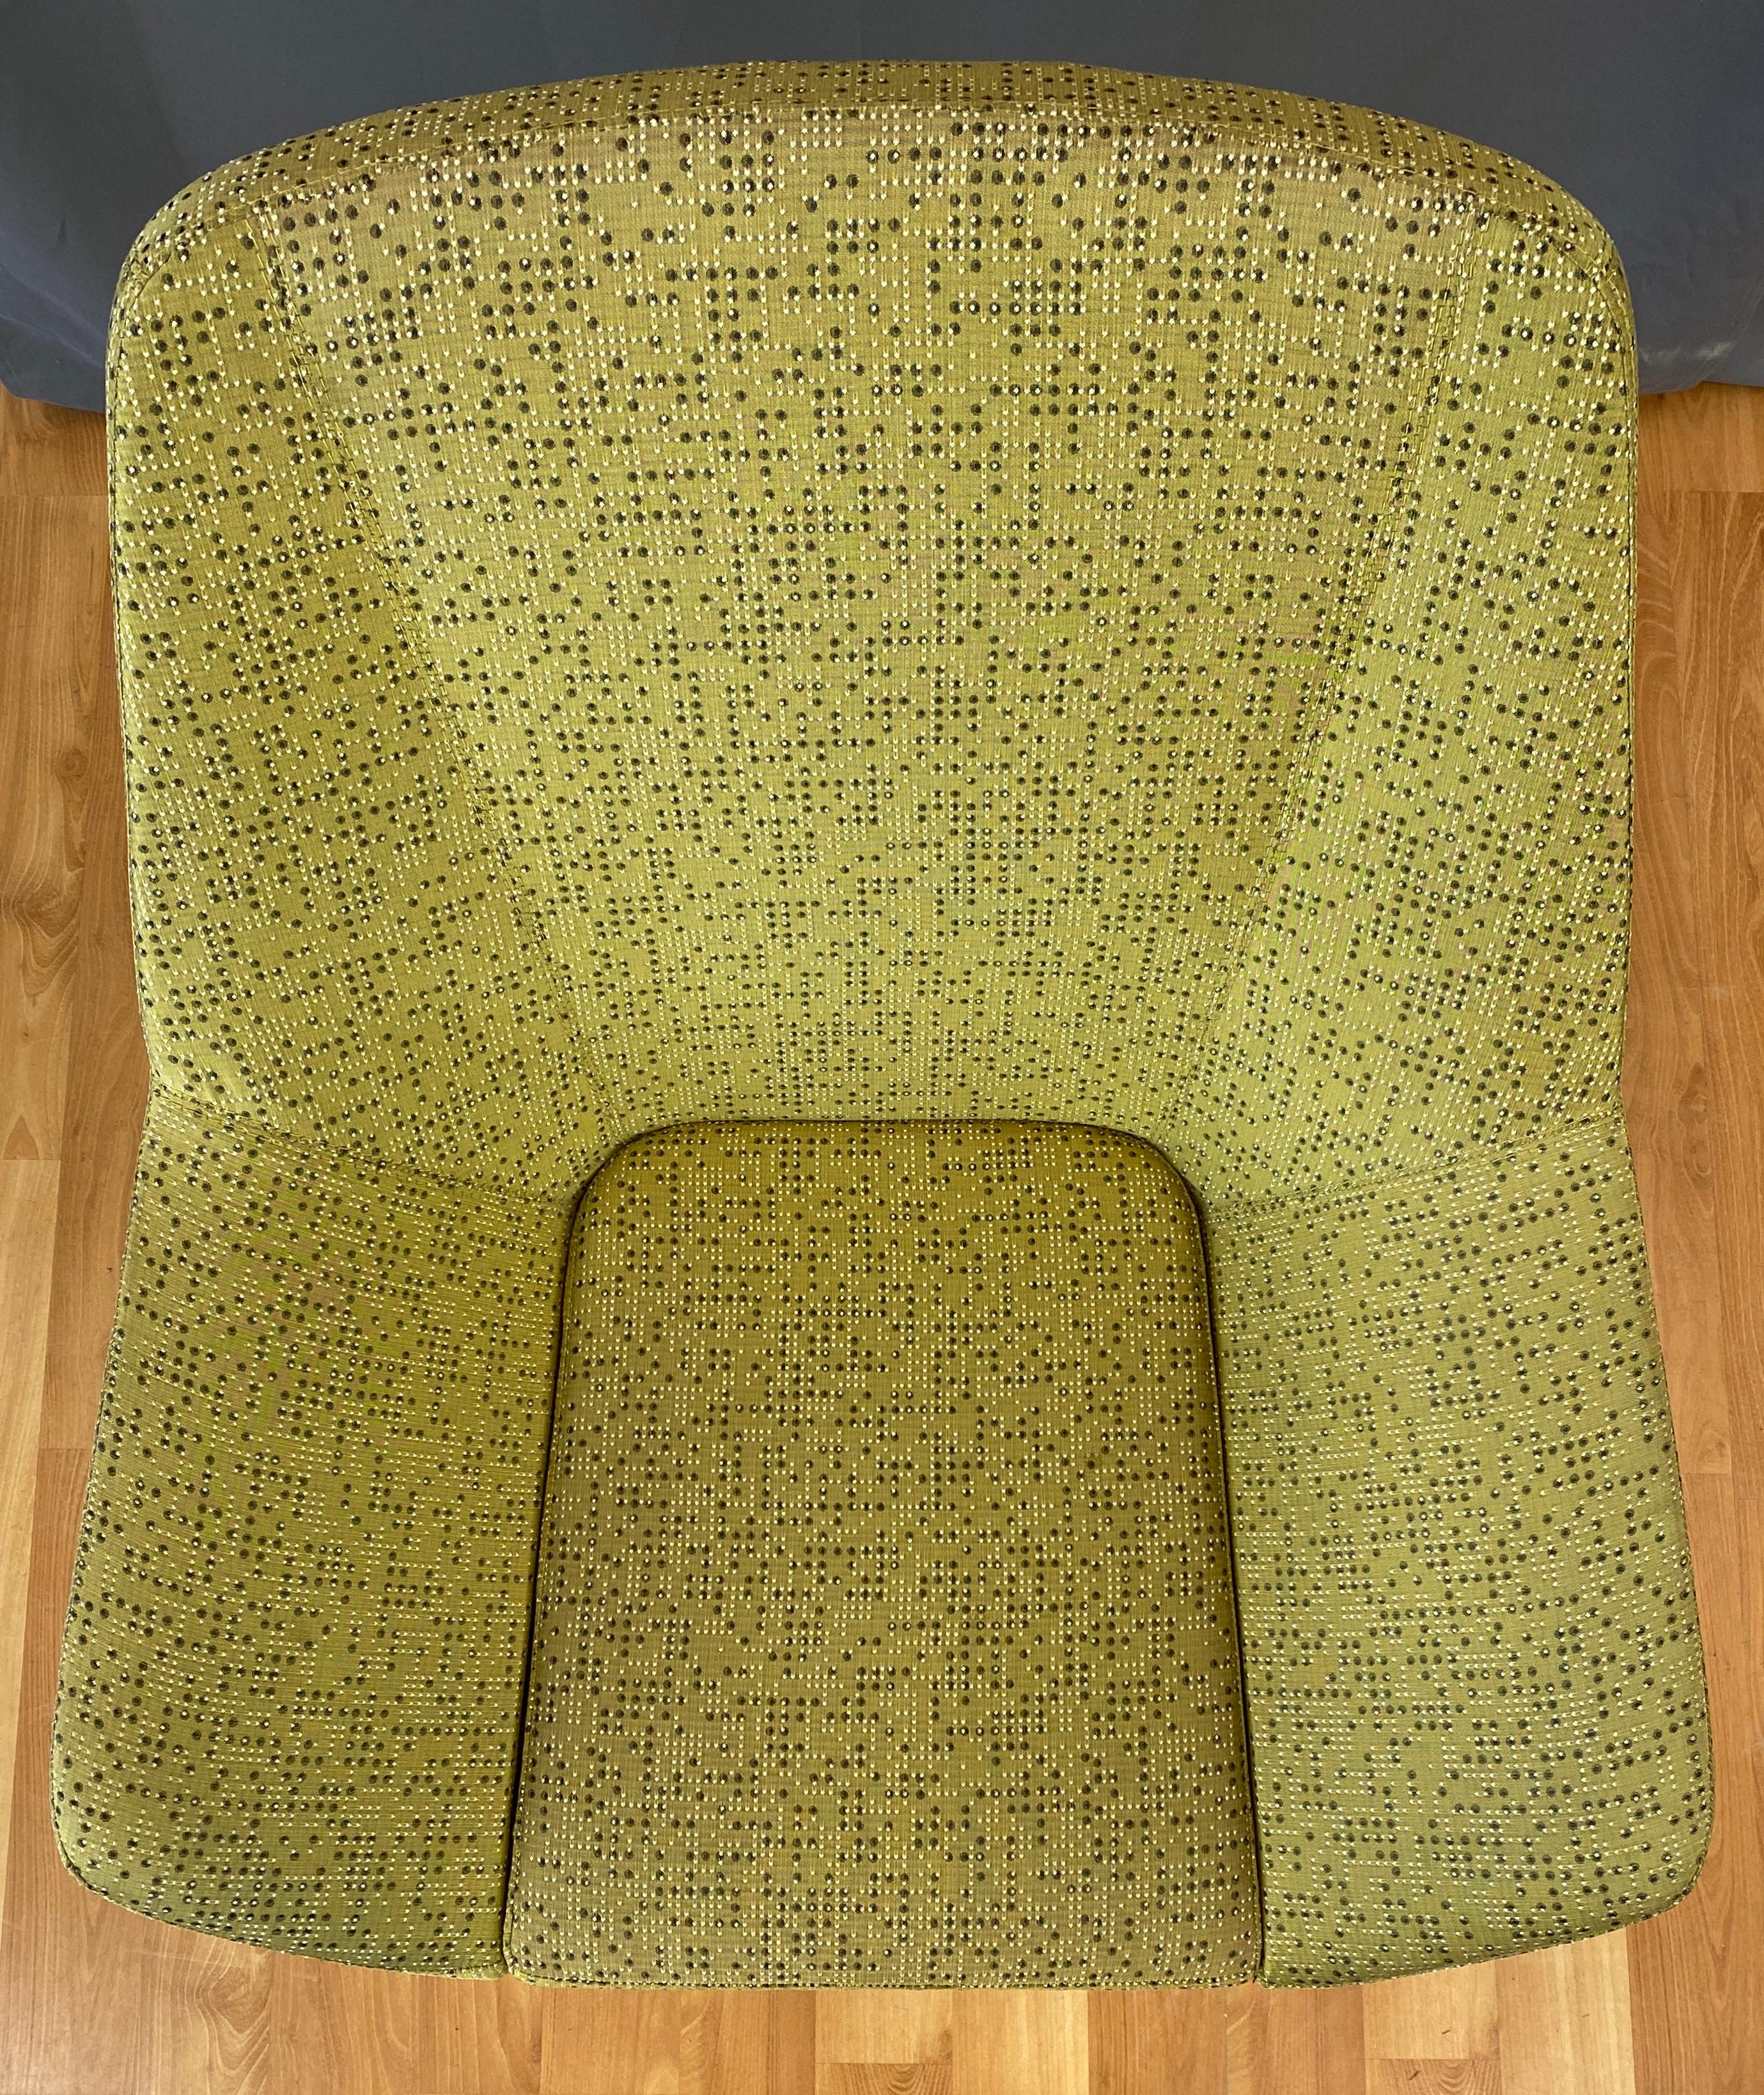 Contemporary EOOS designed Cahoots Relax Chair for Keilhauer in Chartreuse A